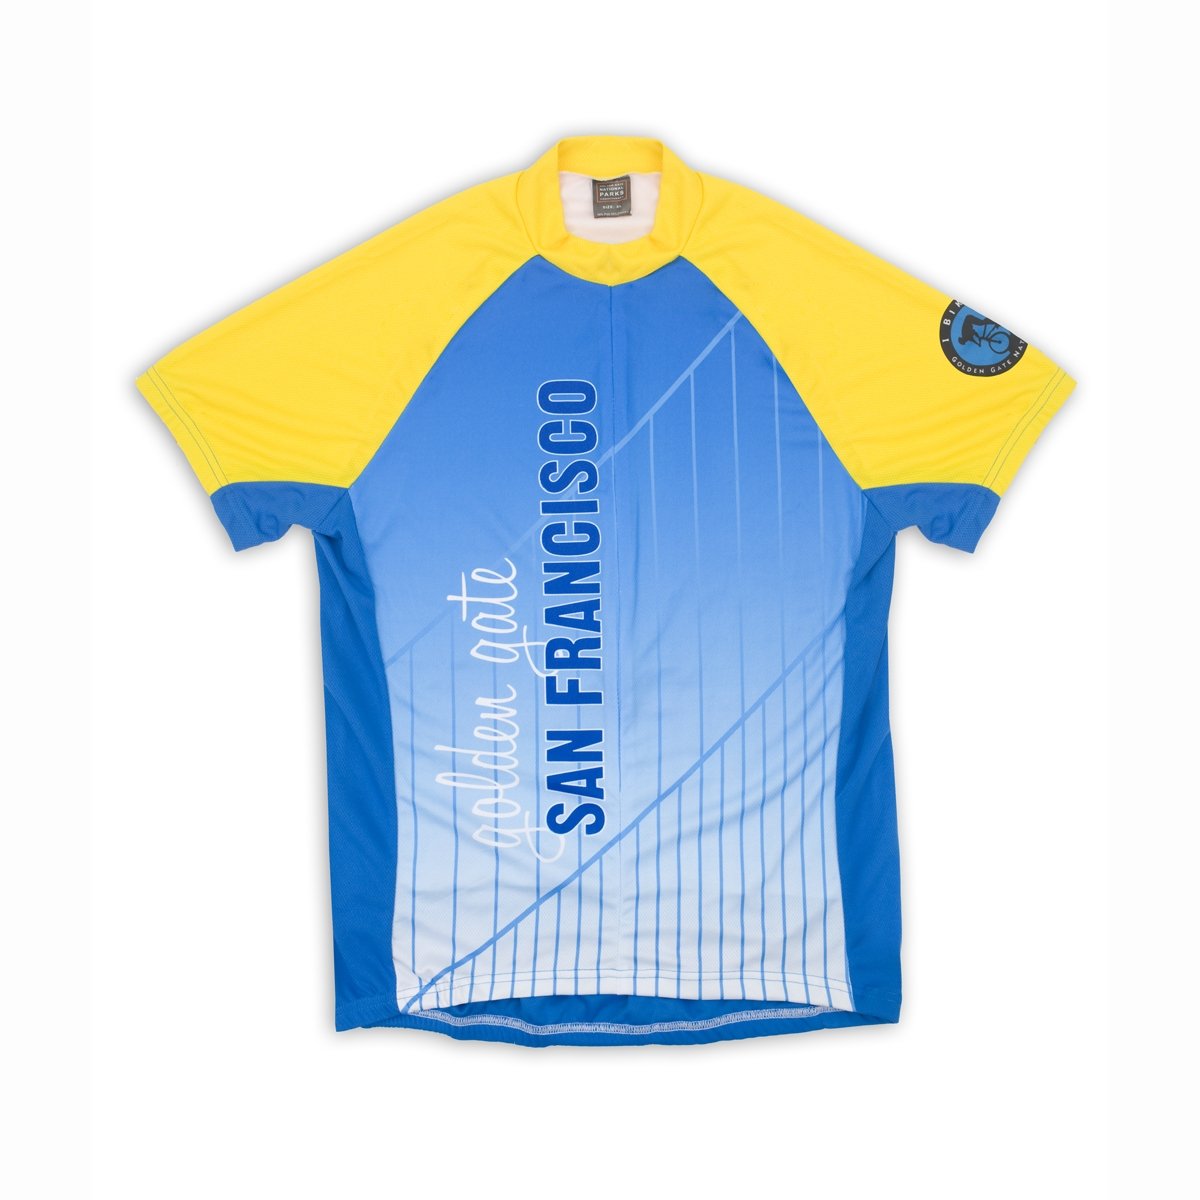 Colorful short-sleeved bike shirt with stylized designs of the Golden Gate Bridge and San Francisco on torso.